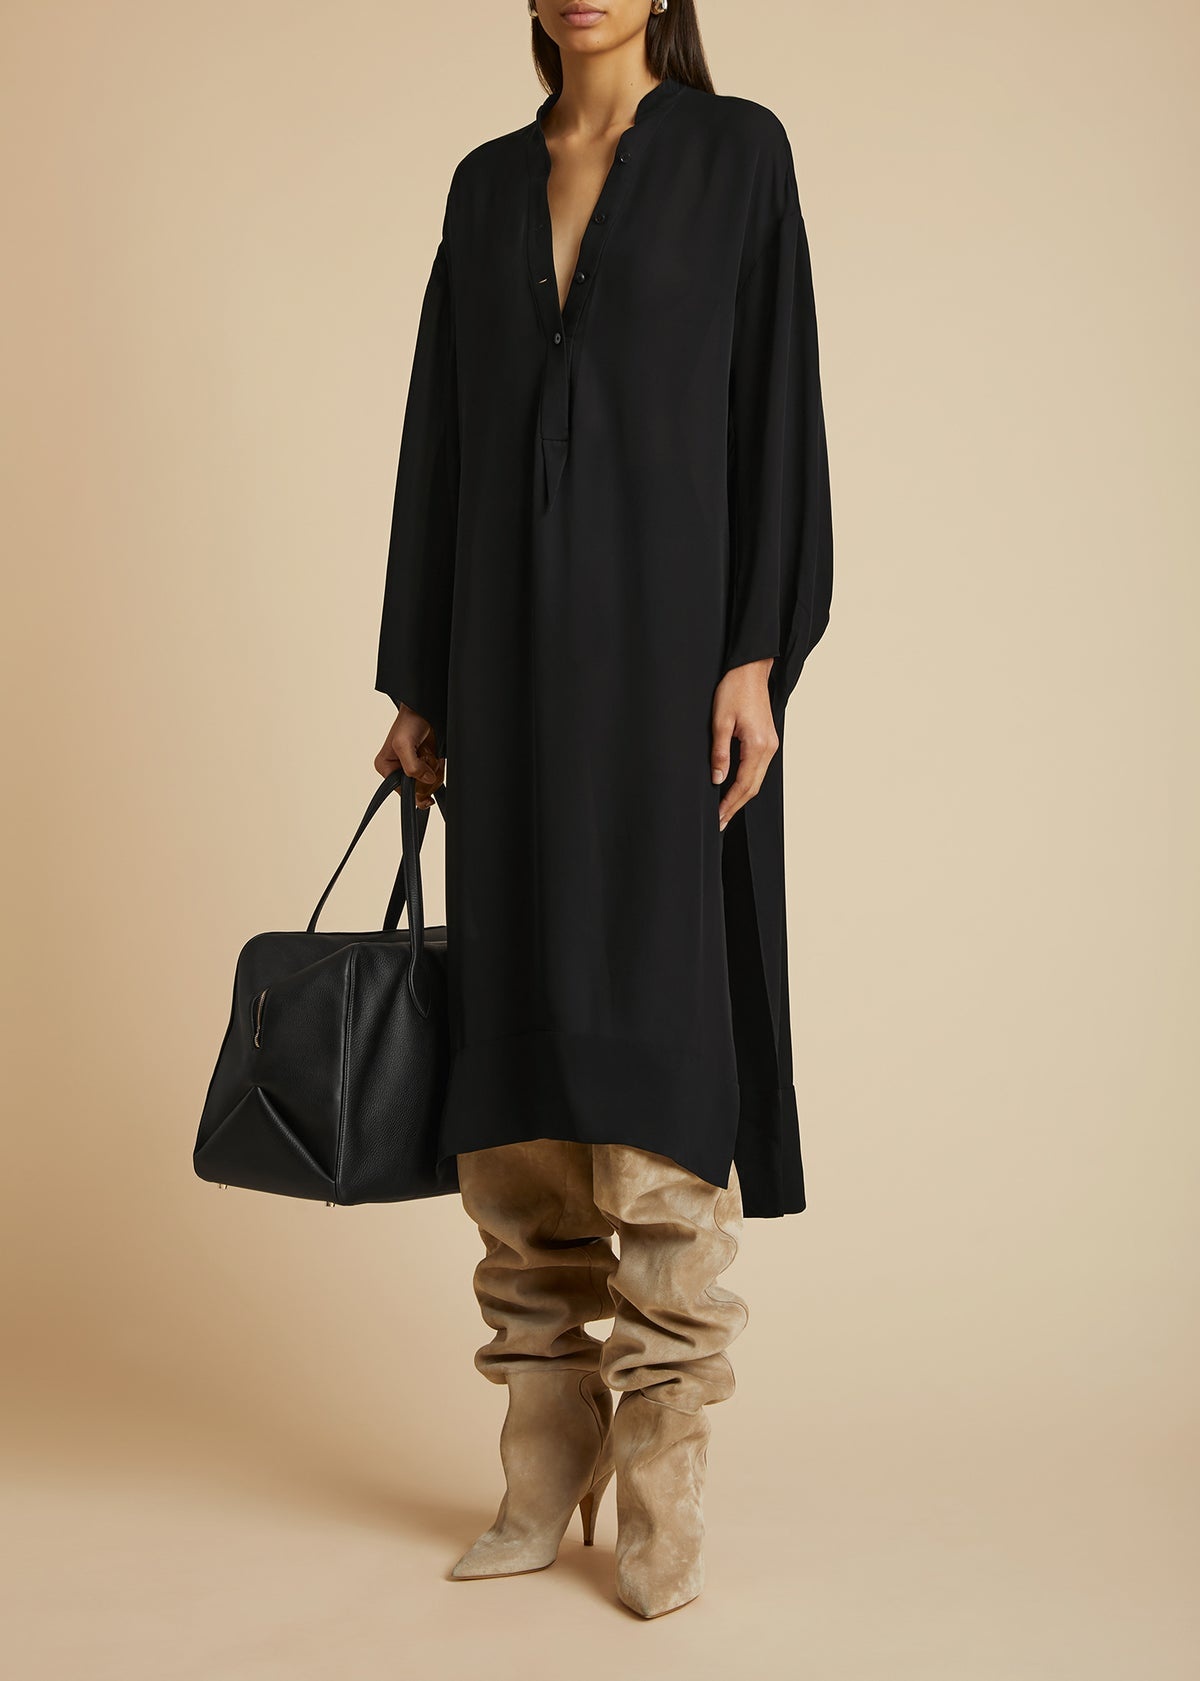 The Brom Dress in Black - 1